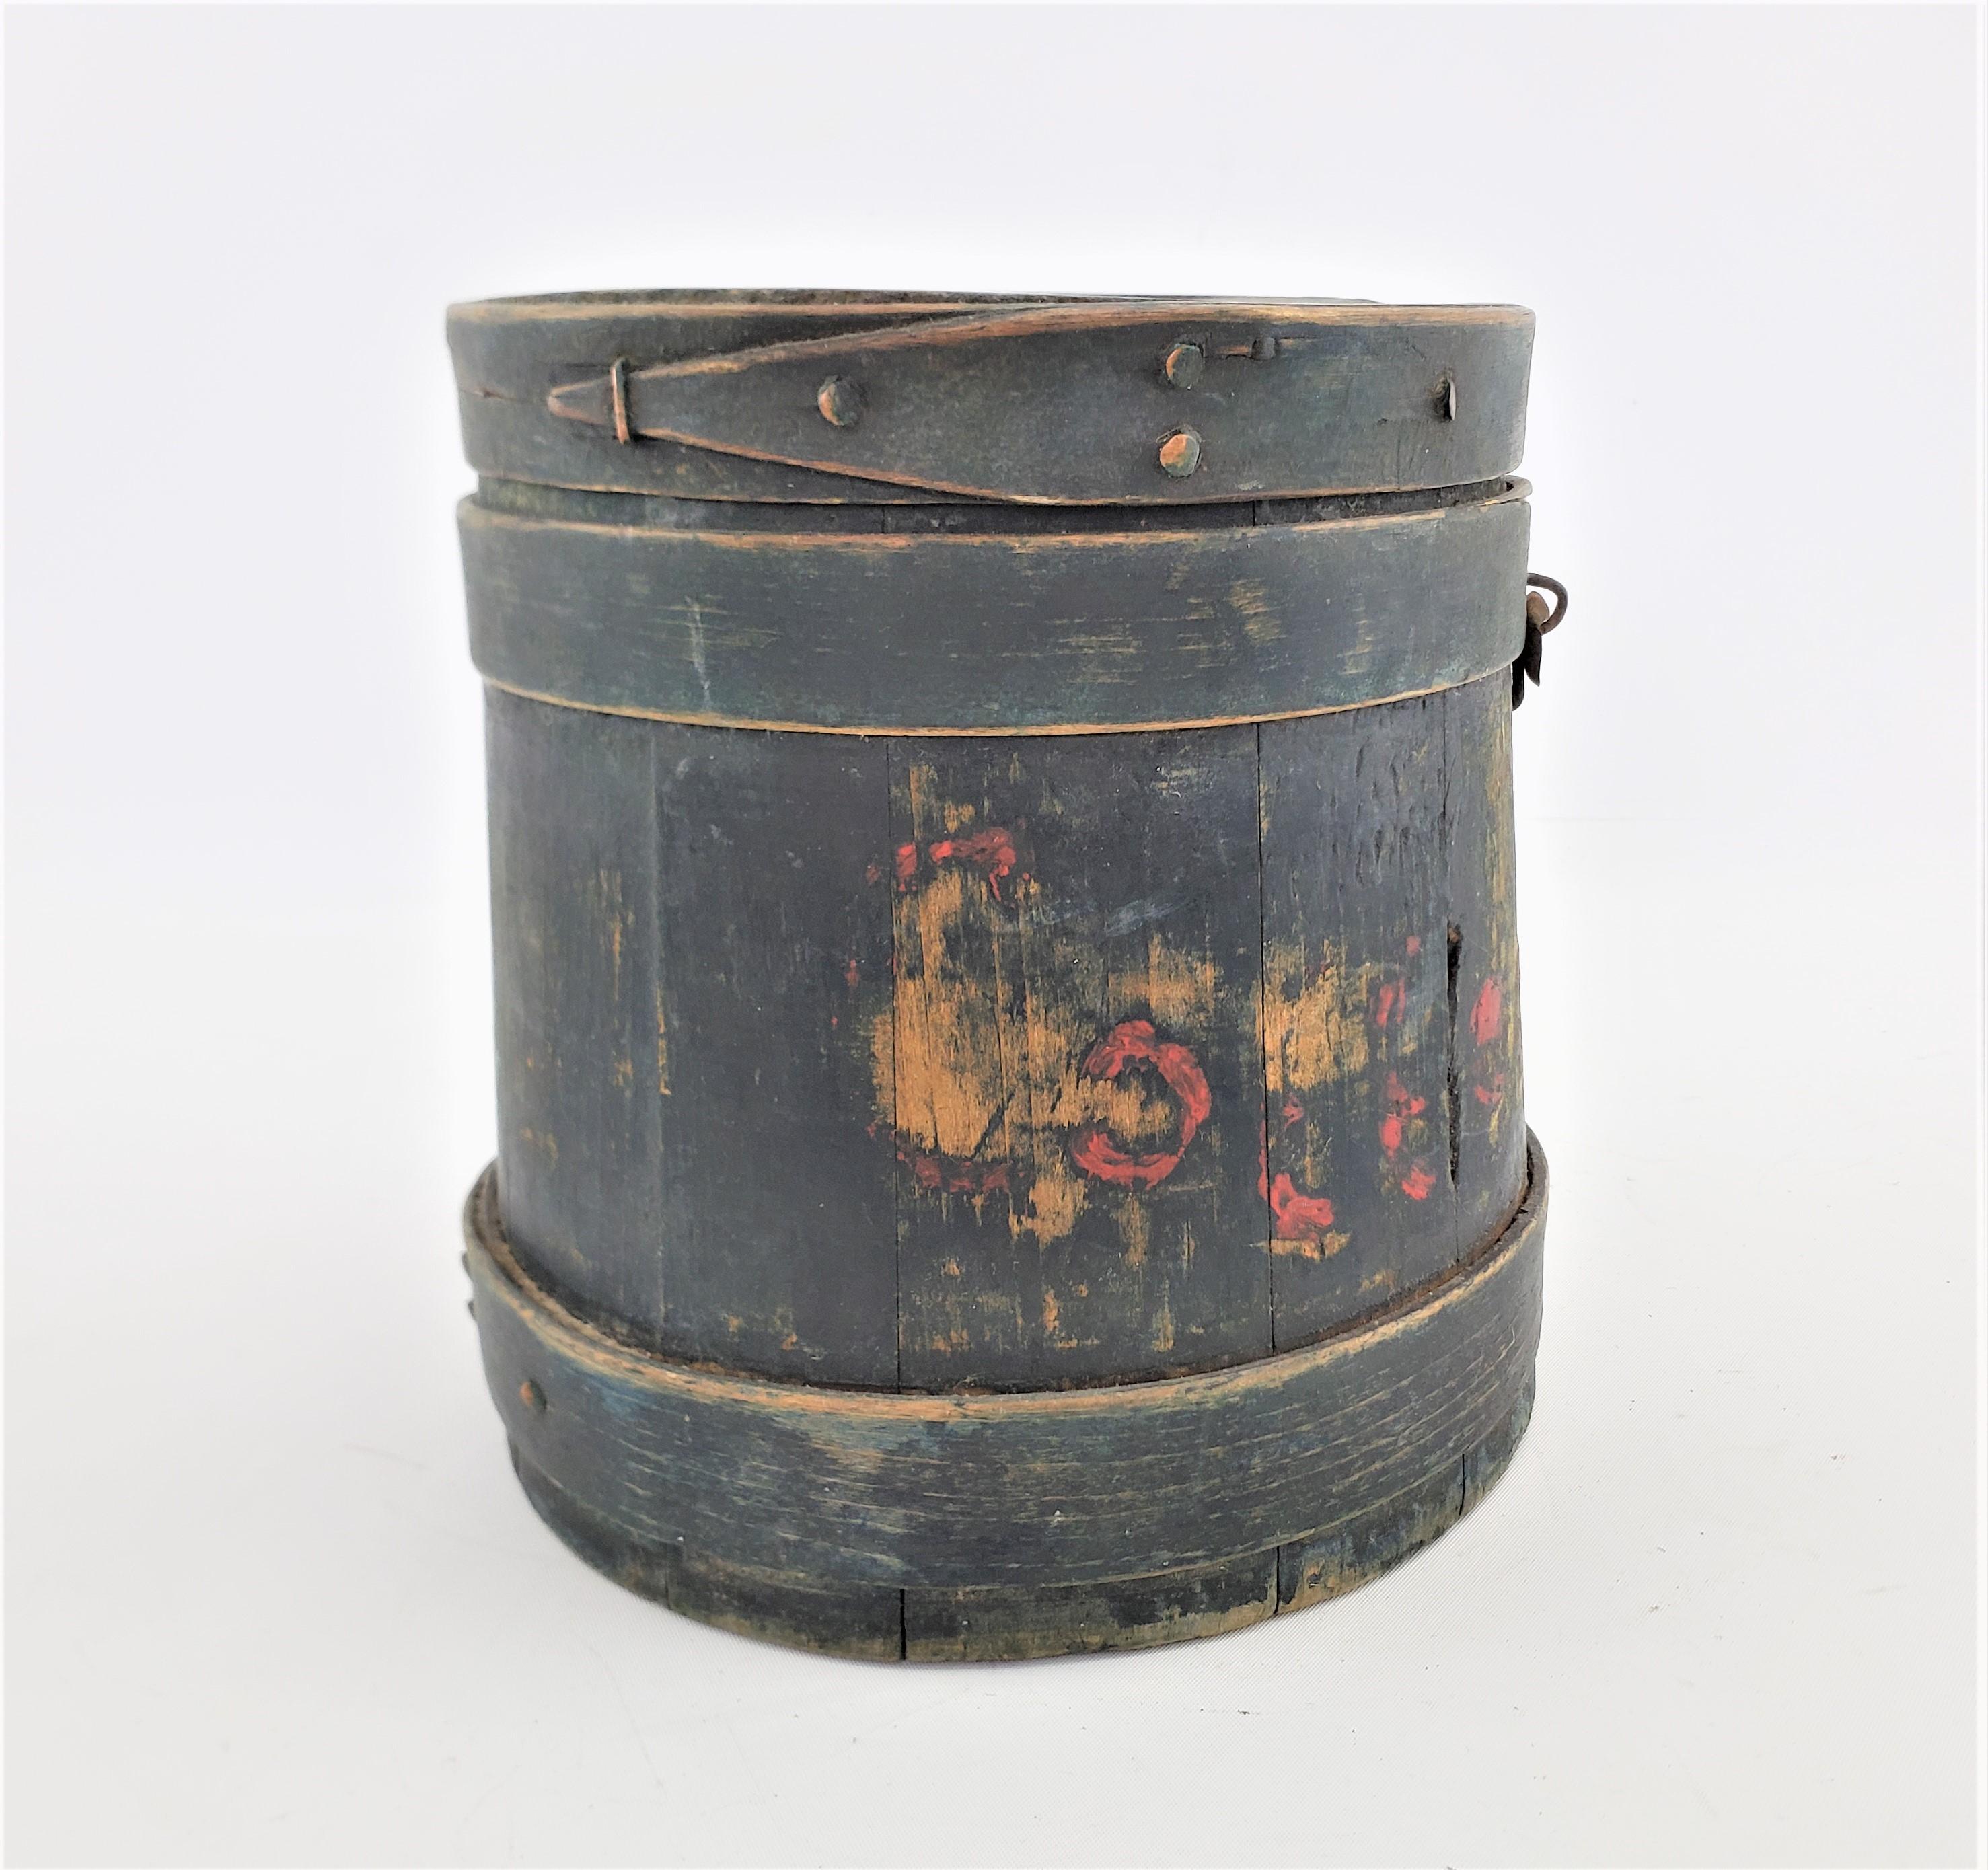 Antique Painted Primitive Covered & Finger Staved Sugar Pail, Bucket or Firkin In Good Condition For Sale In Hamilton, Ontario